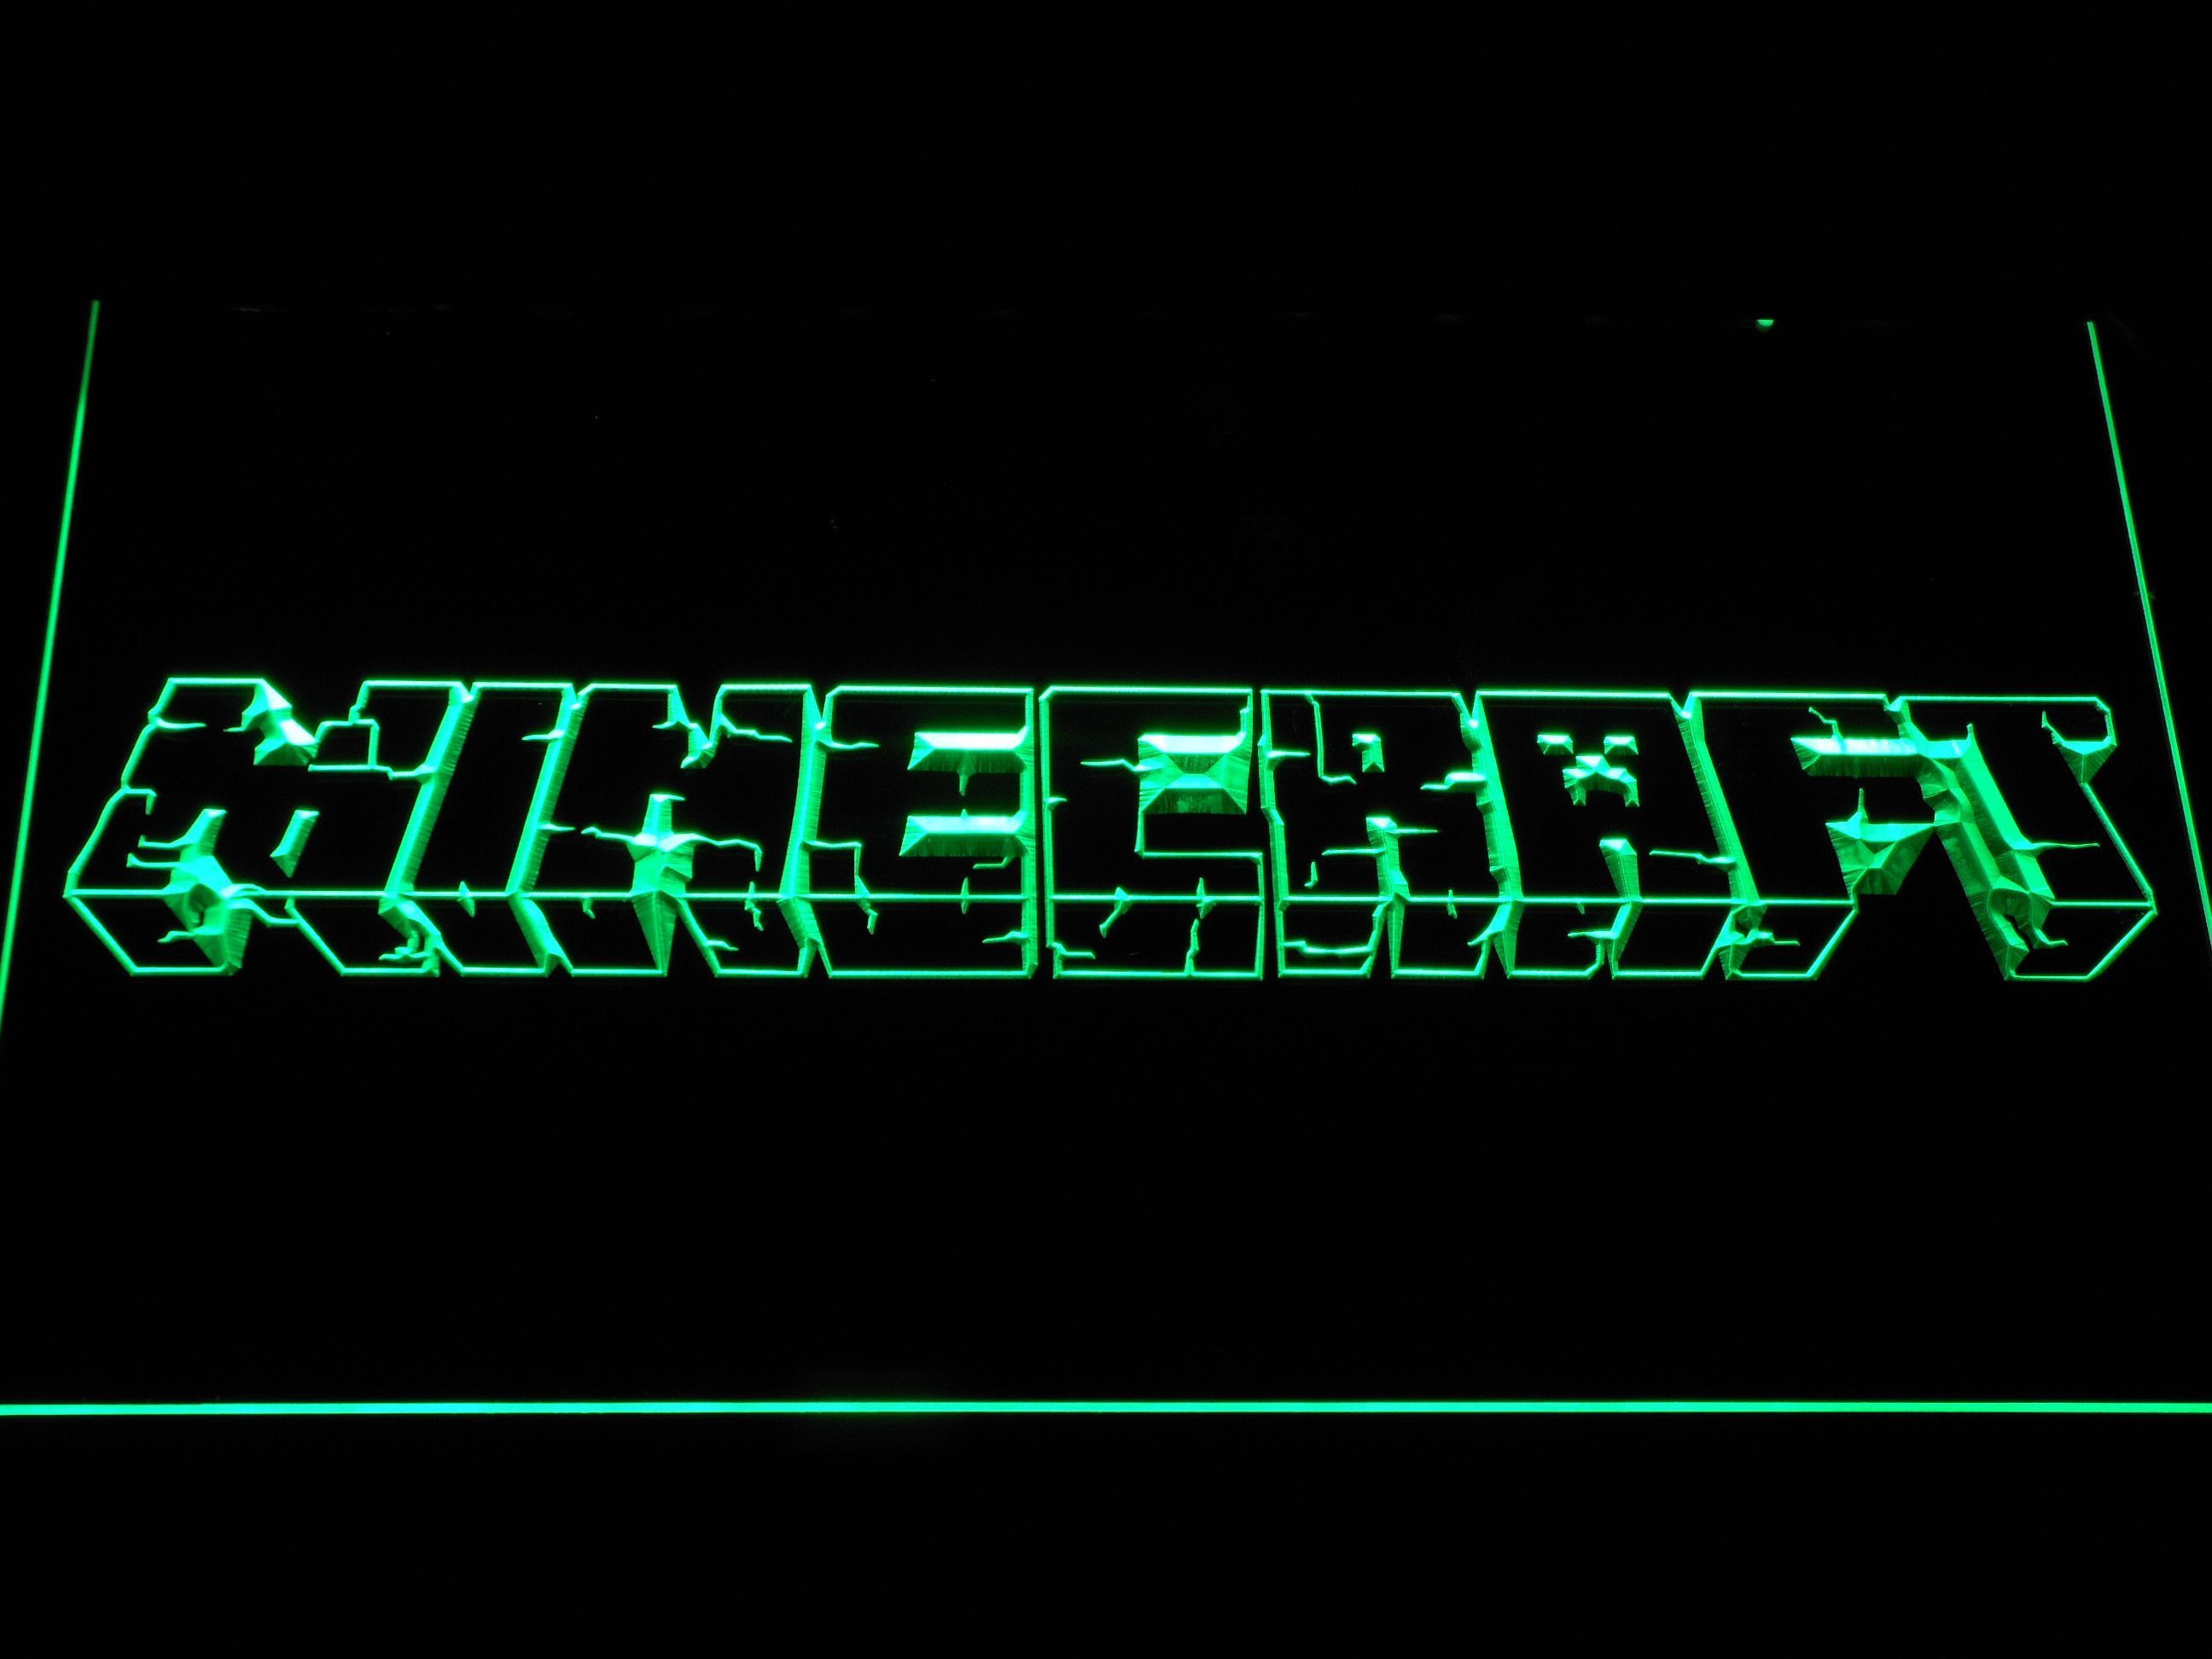 Minecraft LED Neon Sign. Neon signs, Led neon signs, Cool bedroom accessories